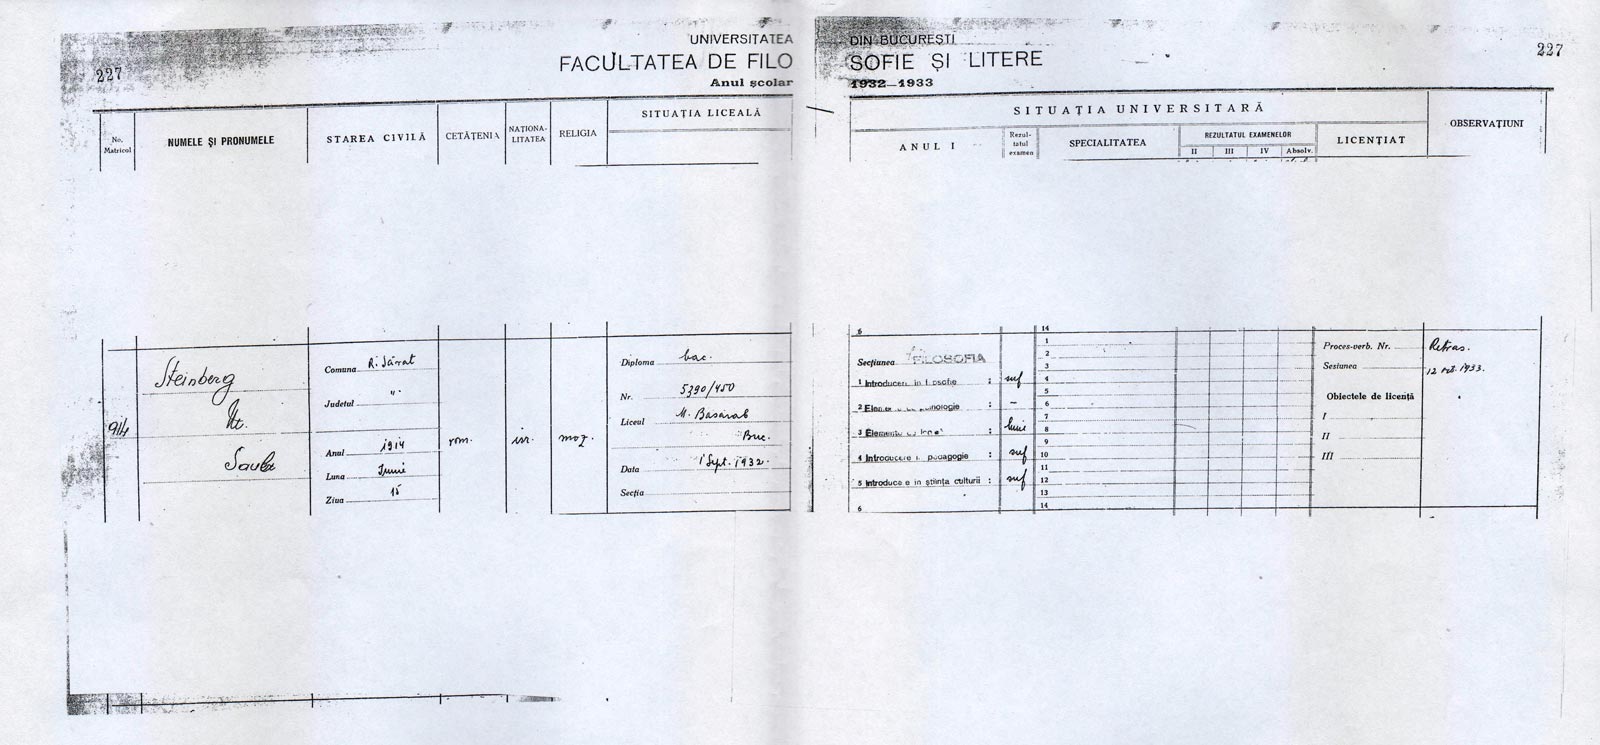 Transcript from Steinberg’s year at the University of Bucharest, 1932-33. Archives of the University of Bucharest.